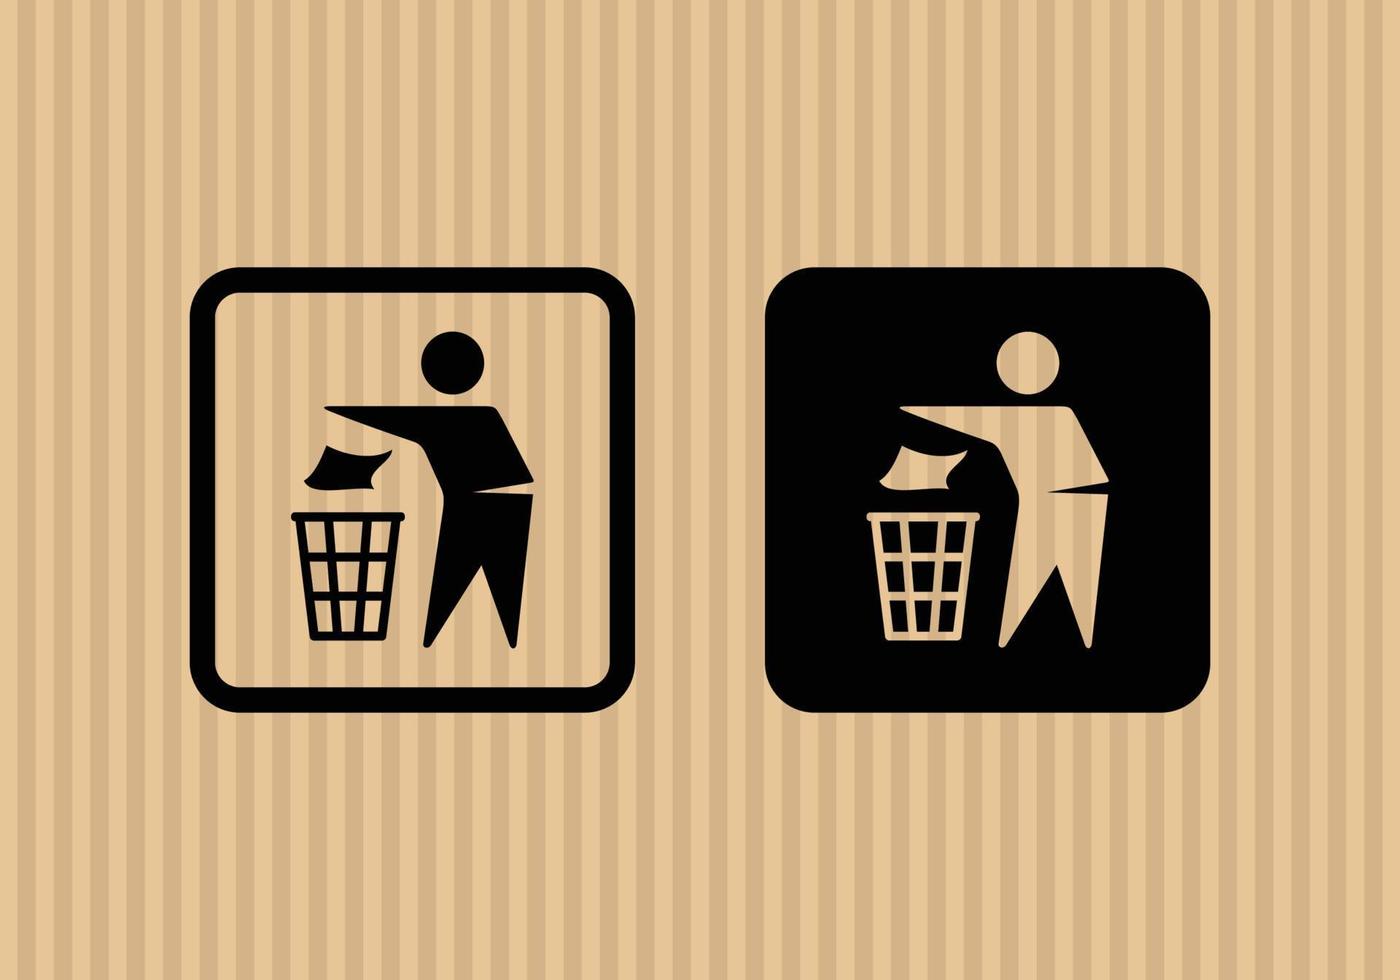 Do not litter simple flat icon vector illustration with cardboard texture background